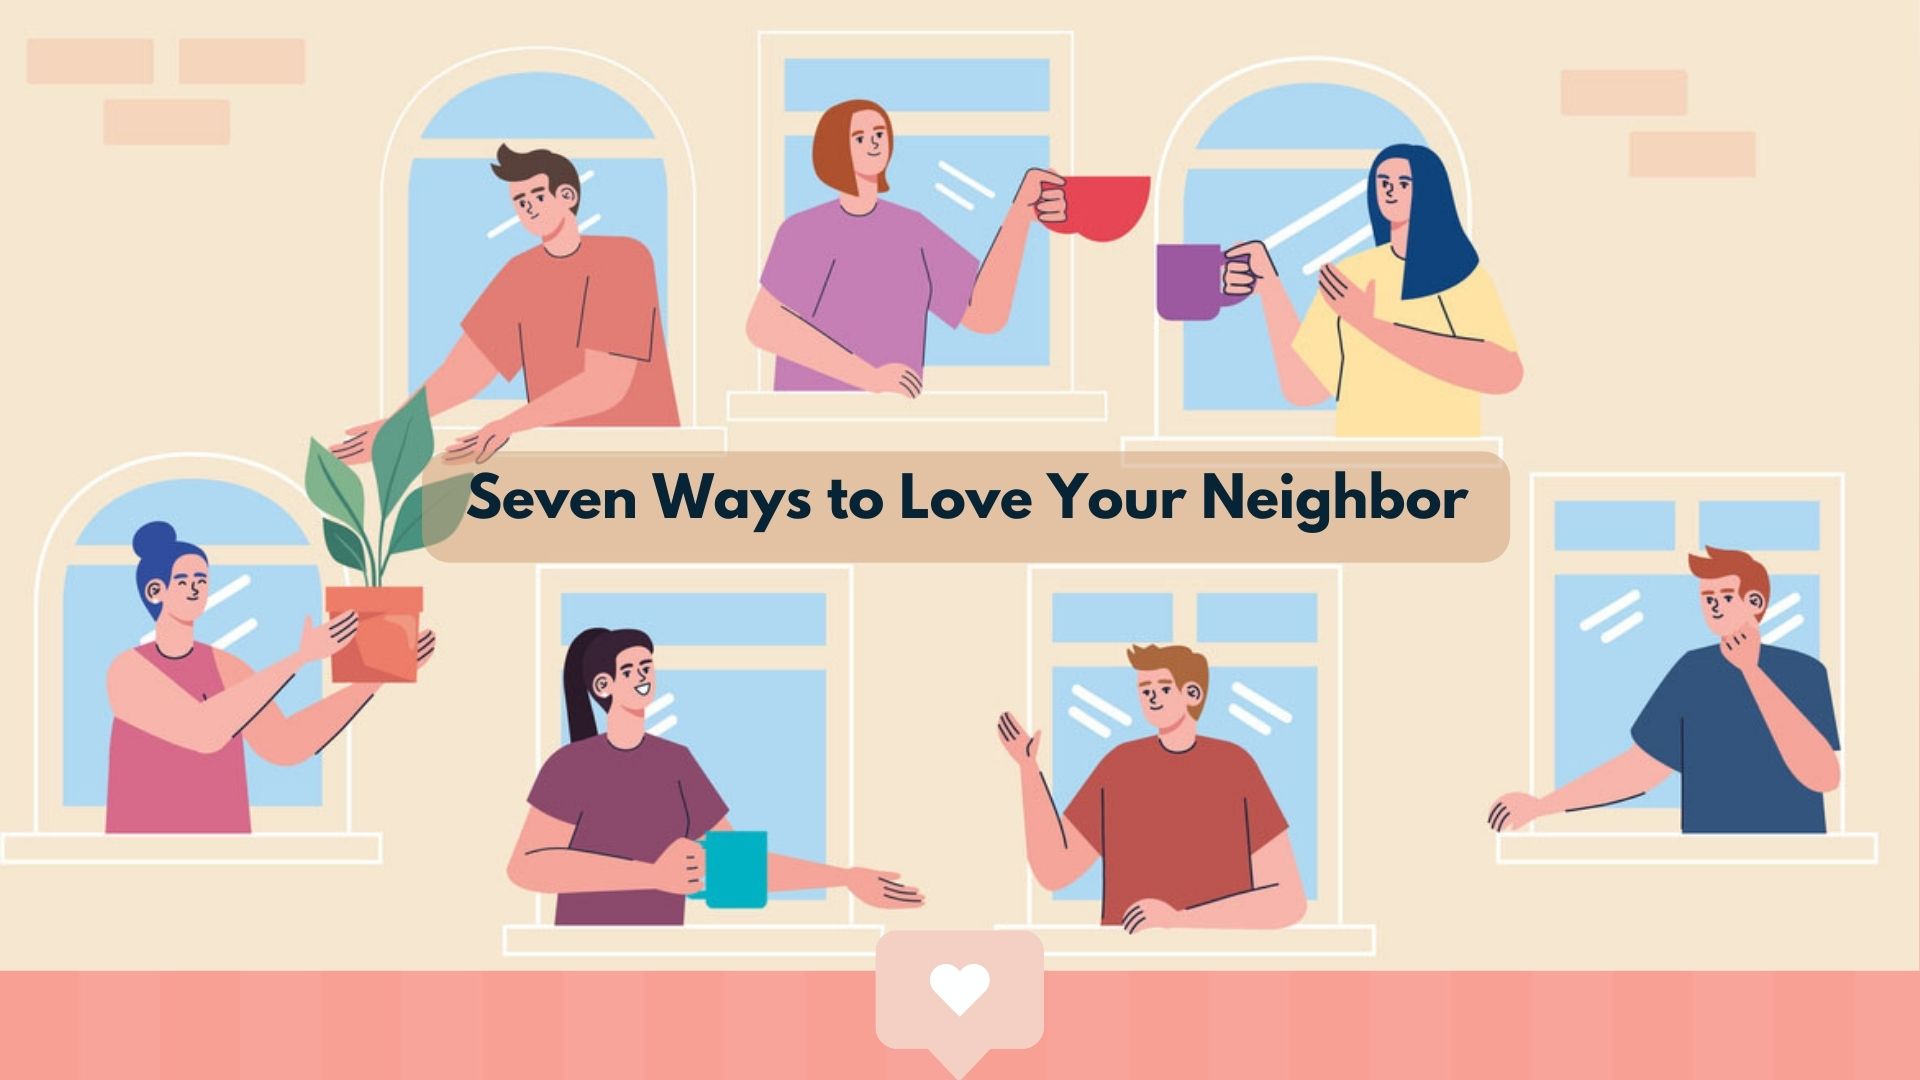 5 Ways to Love Your Neighbor - All Pro Dad